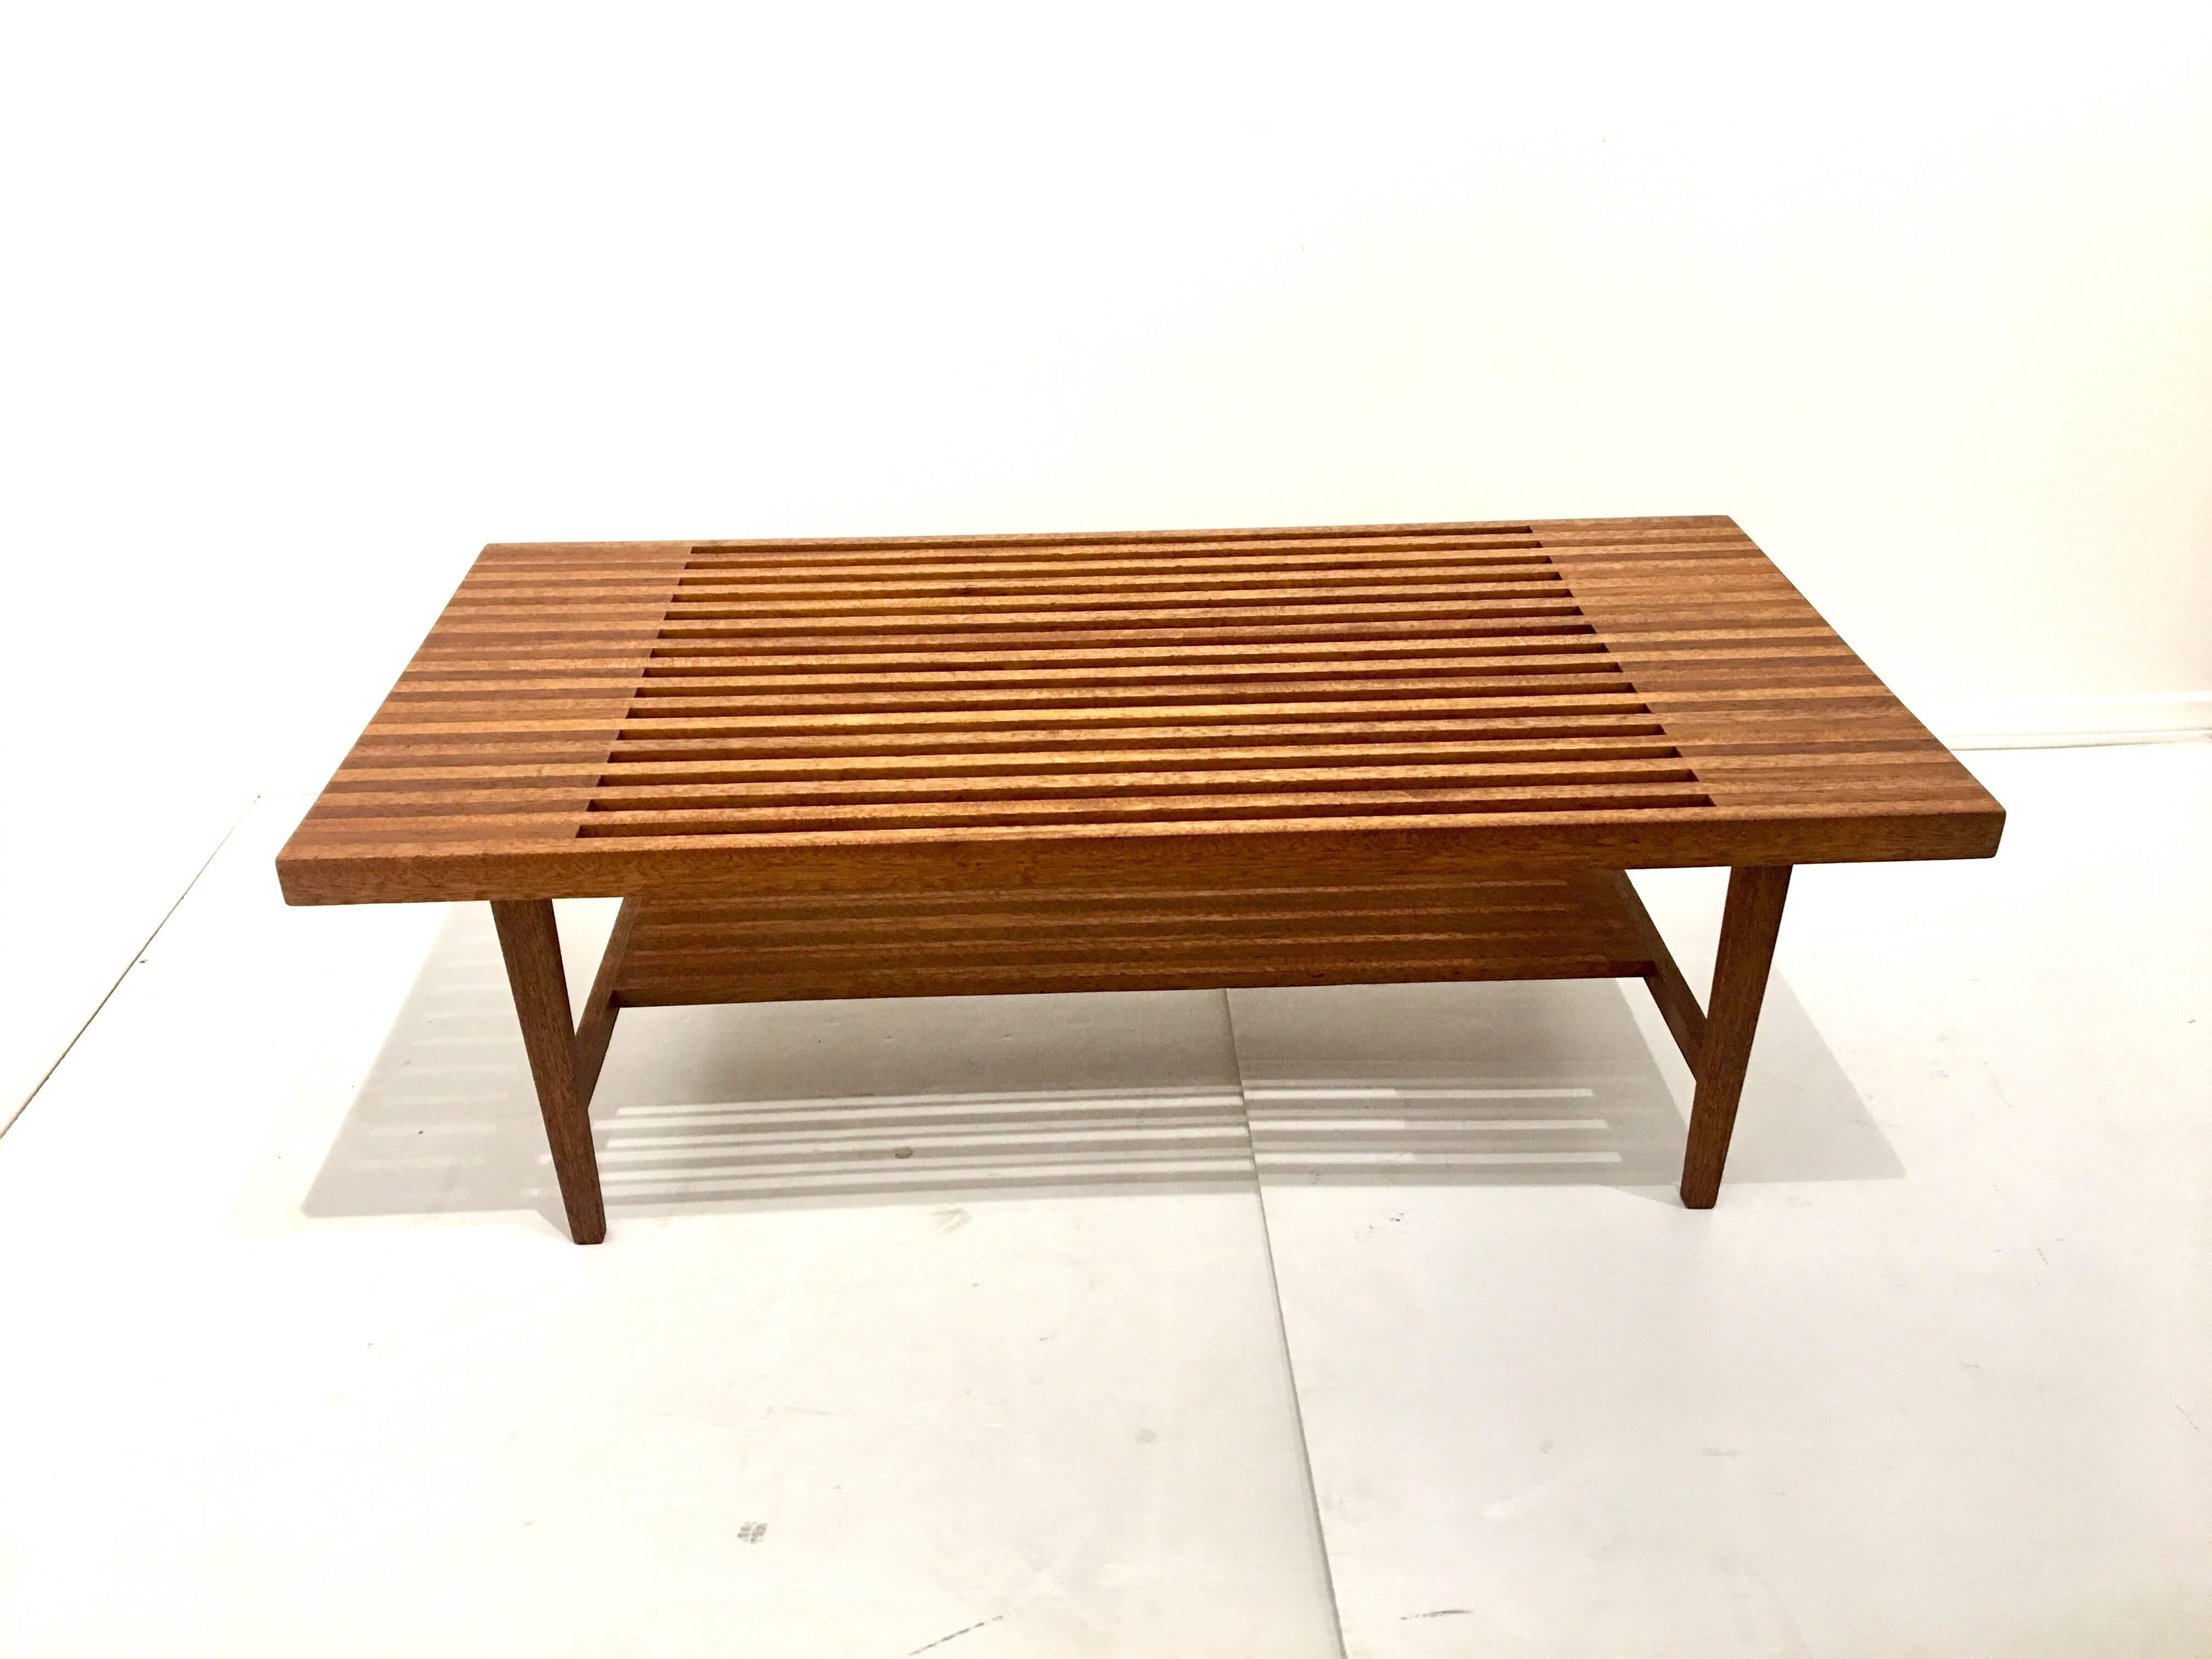 Striking solid mahogany slat bench / coffee table , in the style of Brown Saltman, solid and sturdy incredible craftsmanship and quality, freshly refinished one of a kind piece.